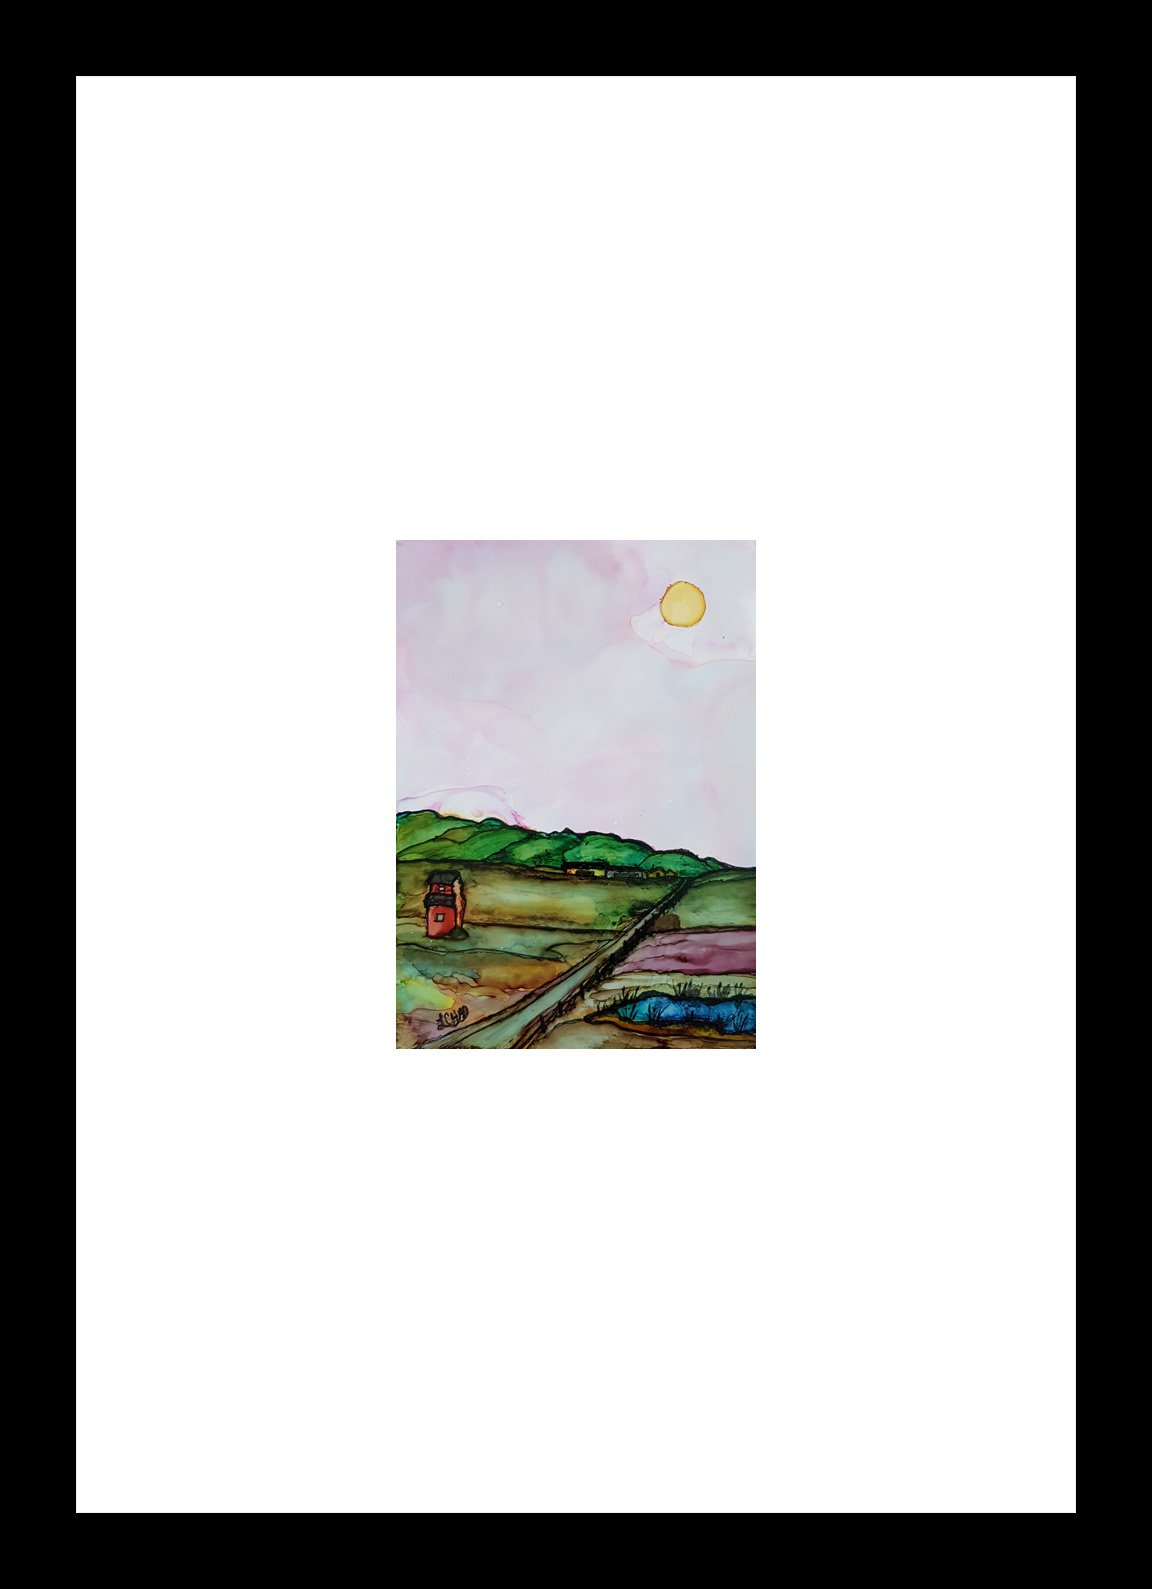 "On the Prairie" [2019]
Image: 5" x 7"
Framed: 10" x 16"
Alcohol Ink on Yuppo
$175.00